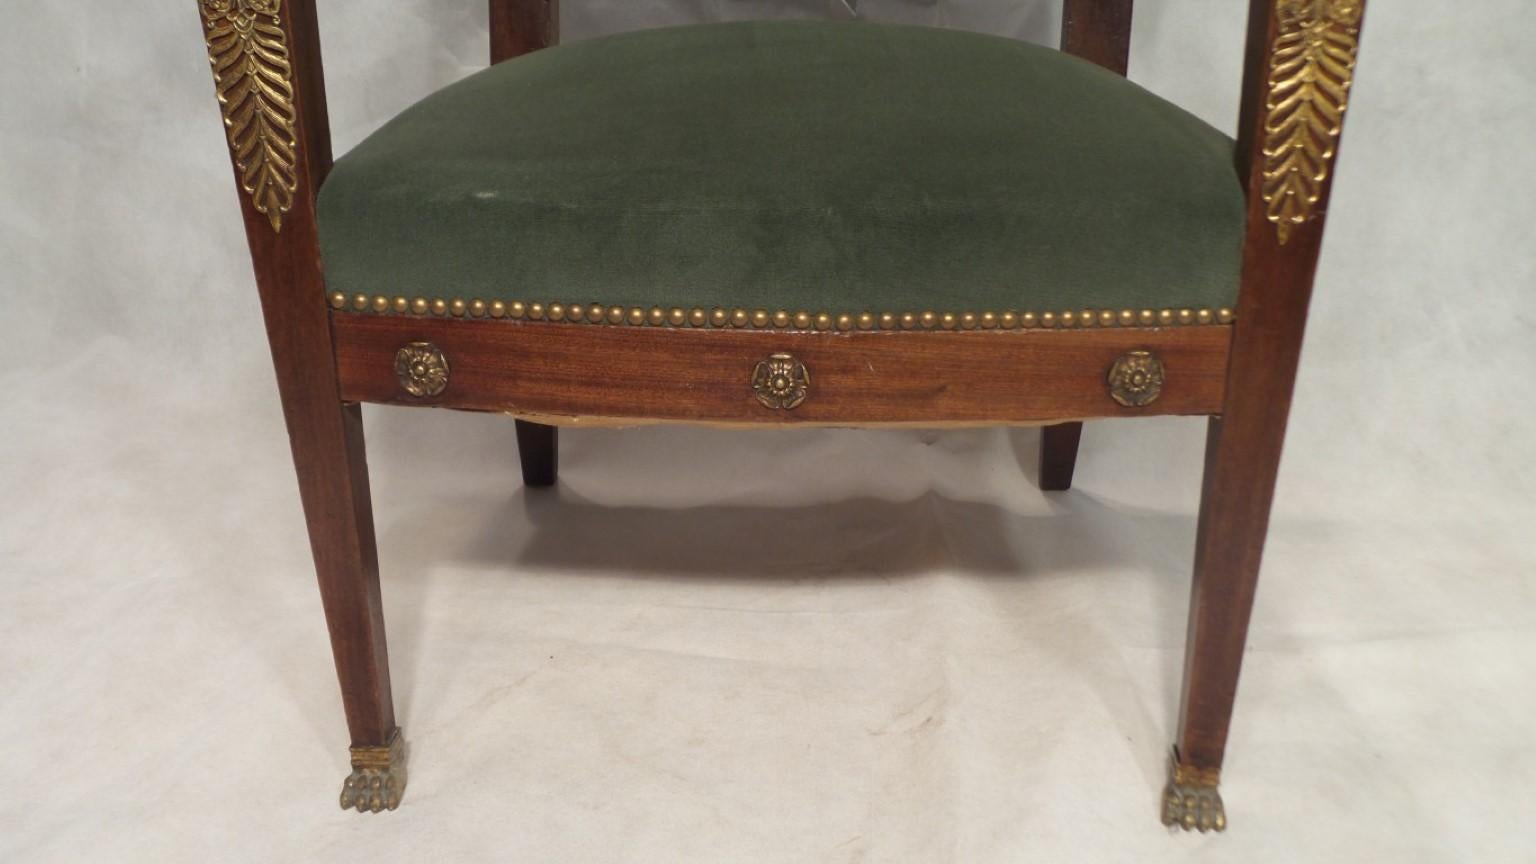 French Egyptian Revival Chair  Rosewood with Ormulu Mounts, circa 1900 For Sale